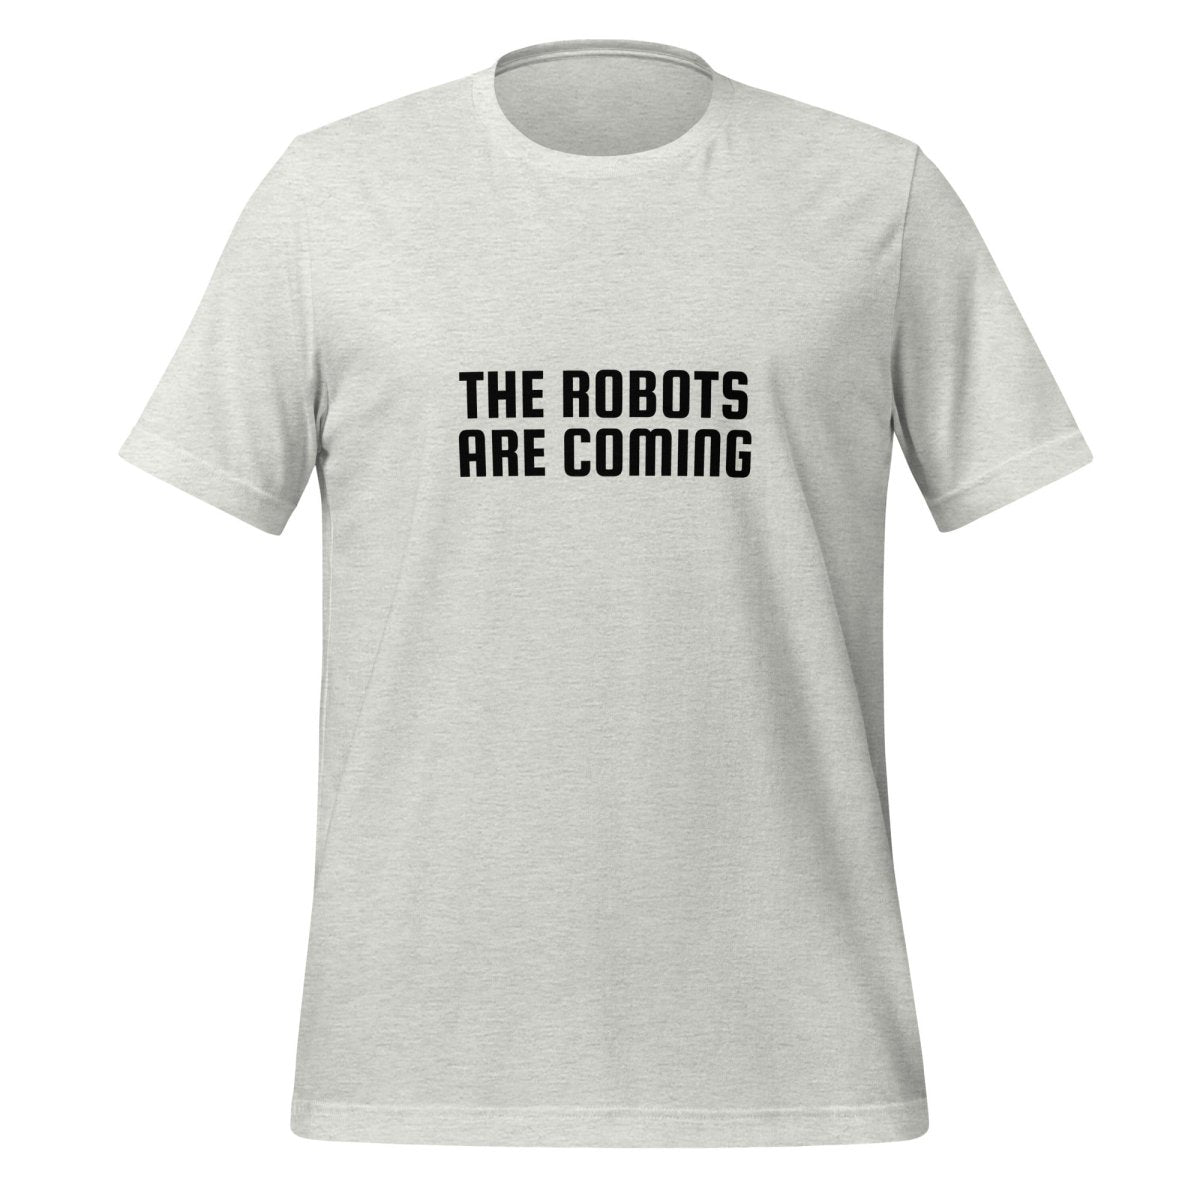 The Robots Are Coming in Black T - Shirt 2 (unisex) - Ash - AI Store